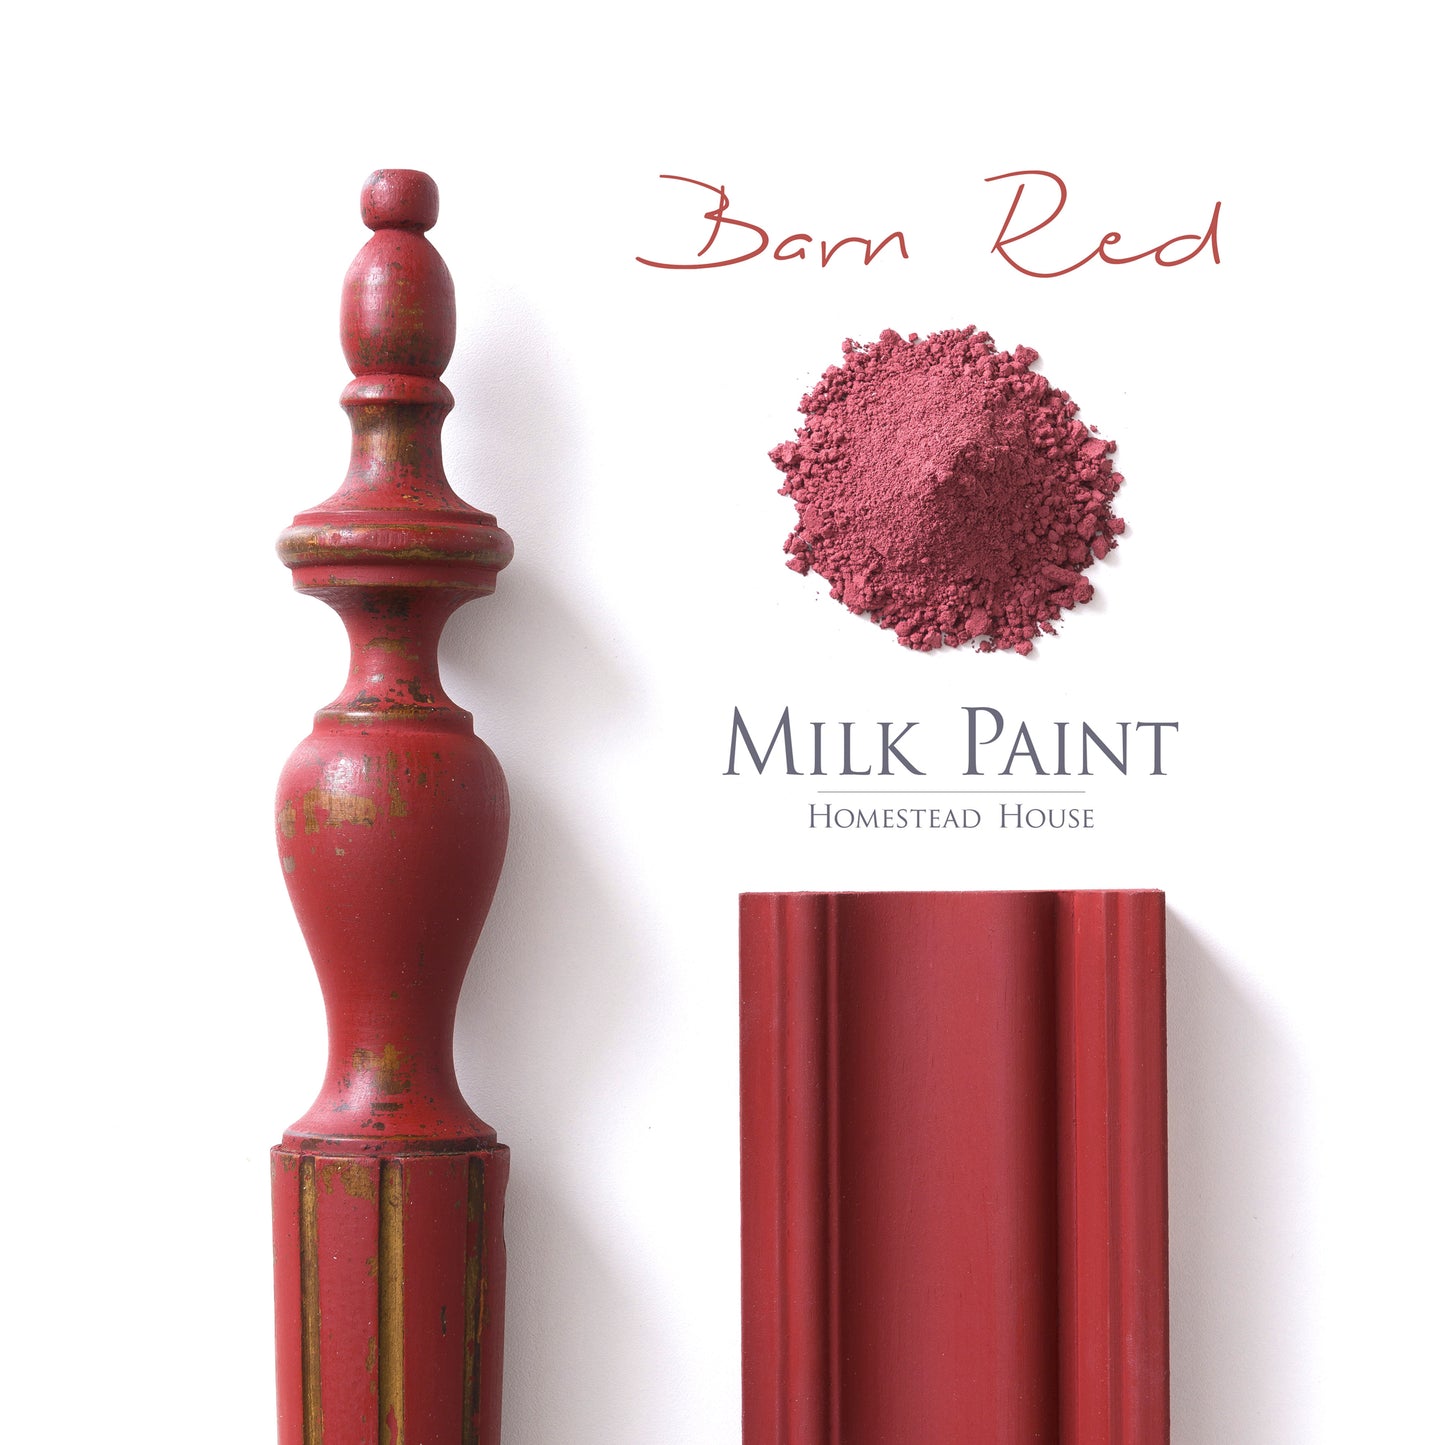 Milk Paint from Homestead House in Barn Red, A rustic red cranberry. | homesteadhouse.ca